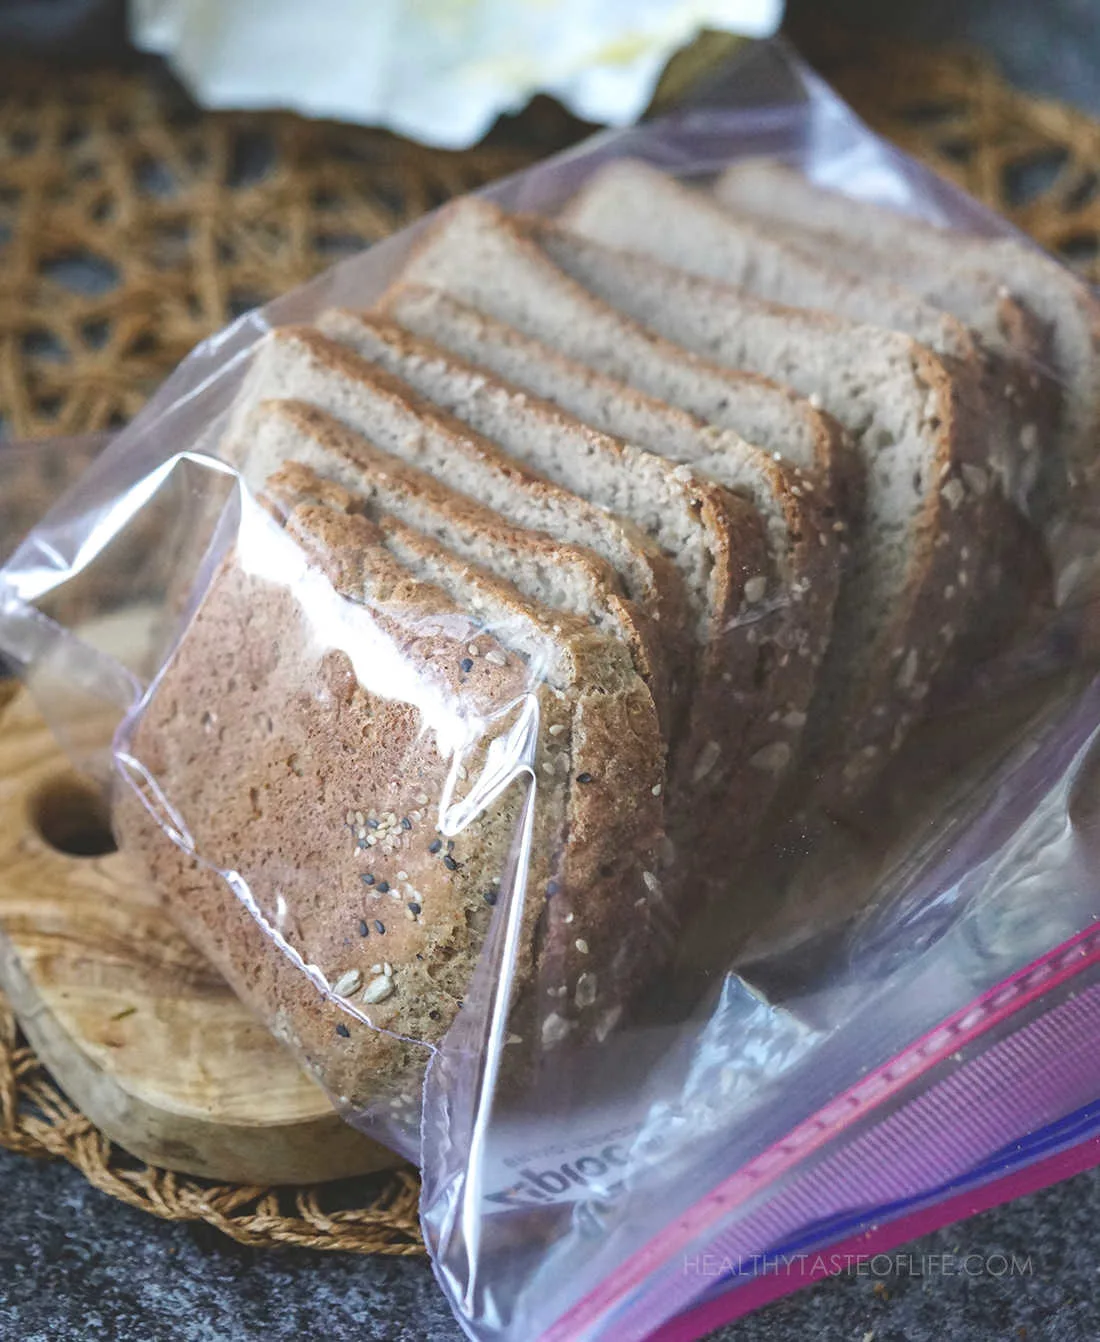 Buckwheat bread stored in a plastic bag ready for the freezer.